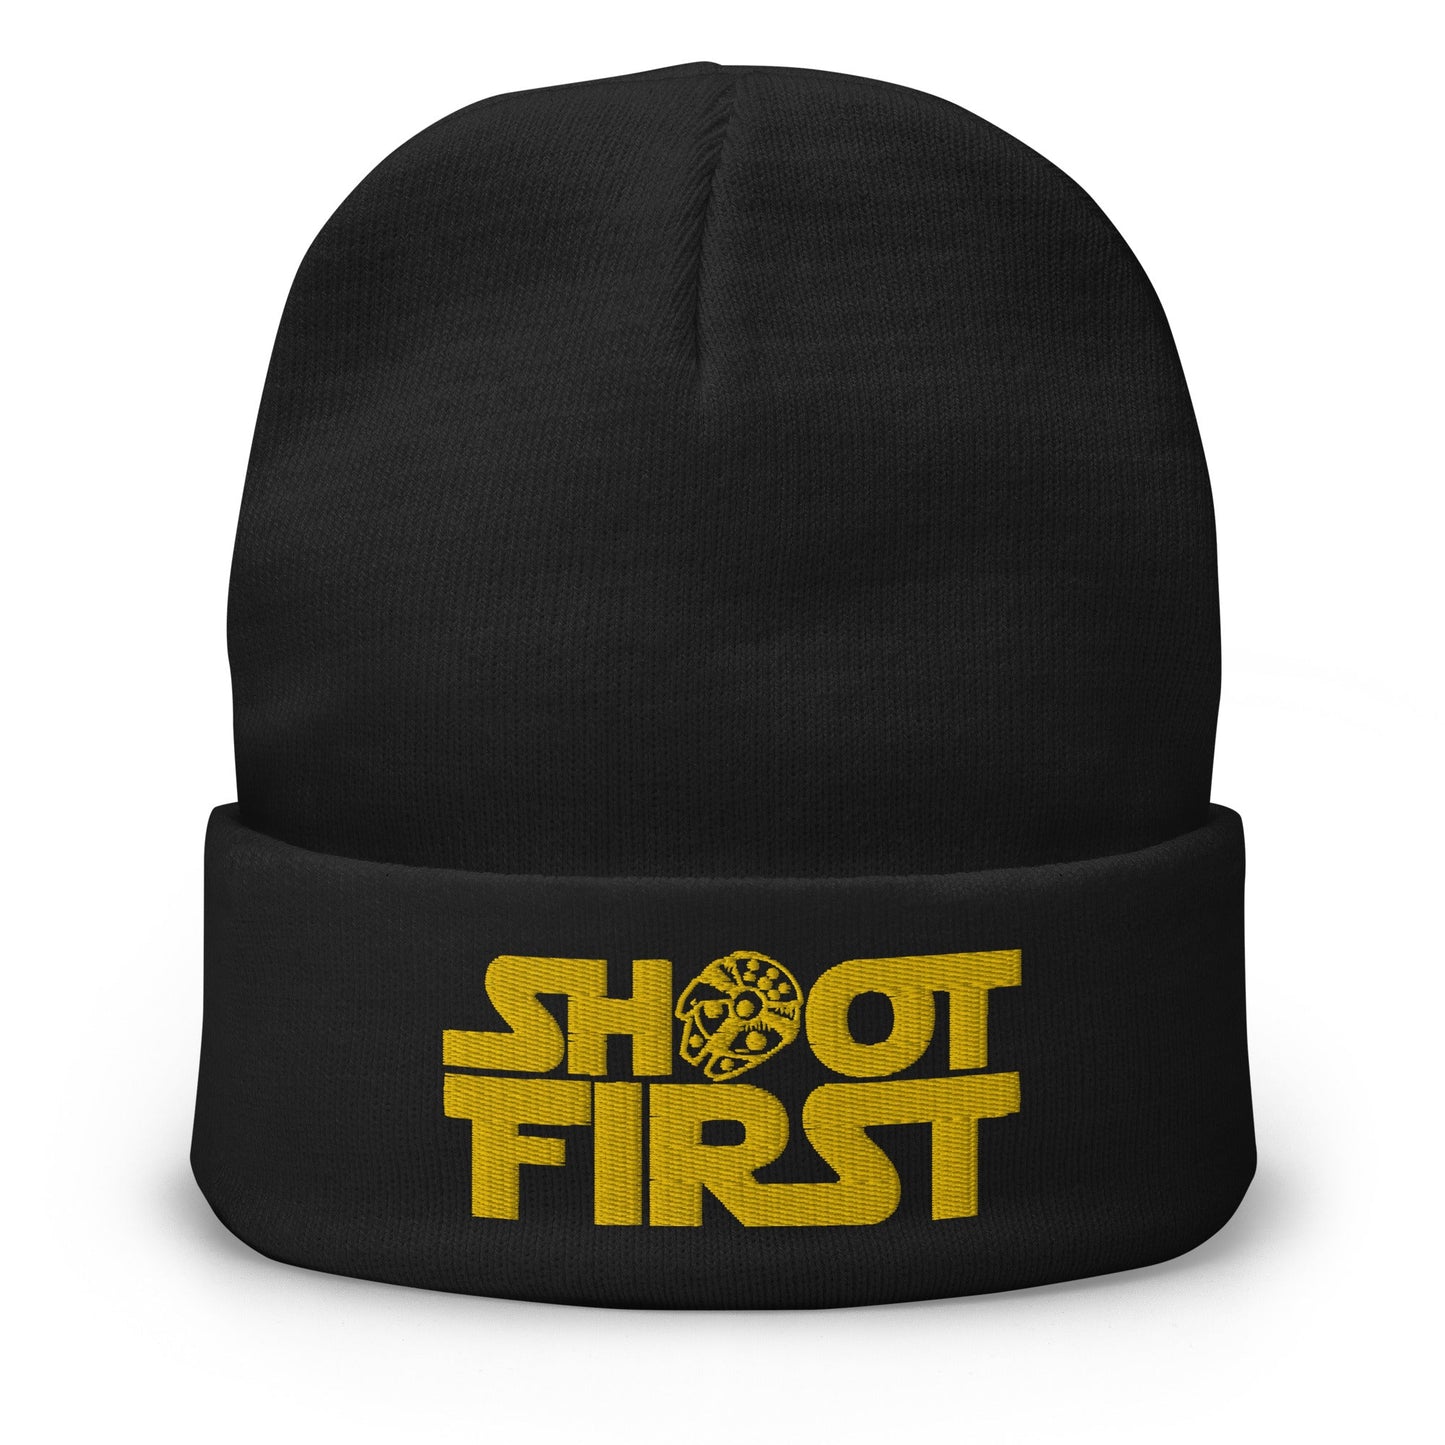 Shoot First Embroidered Beanie